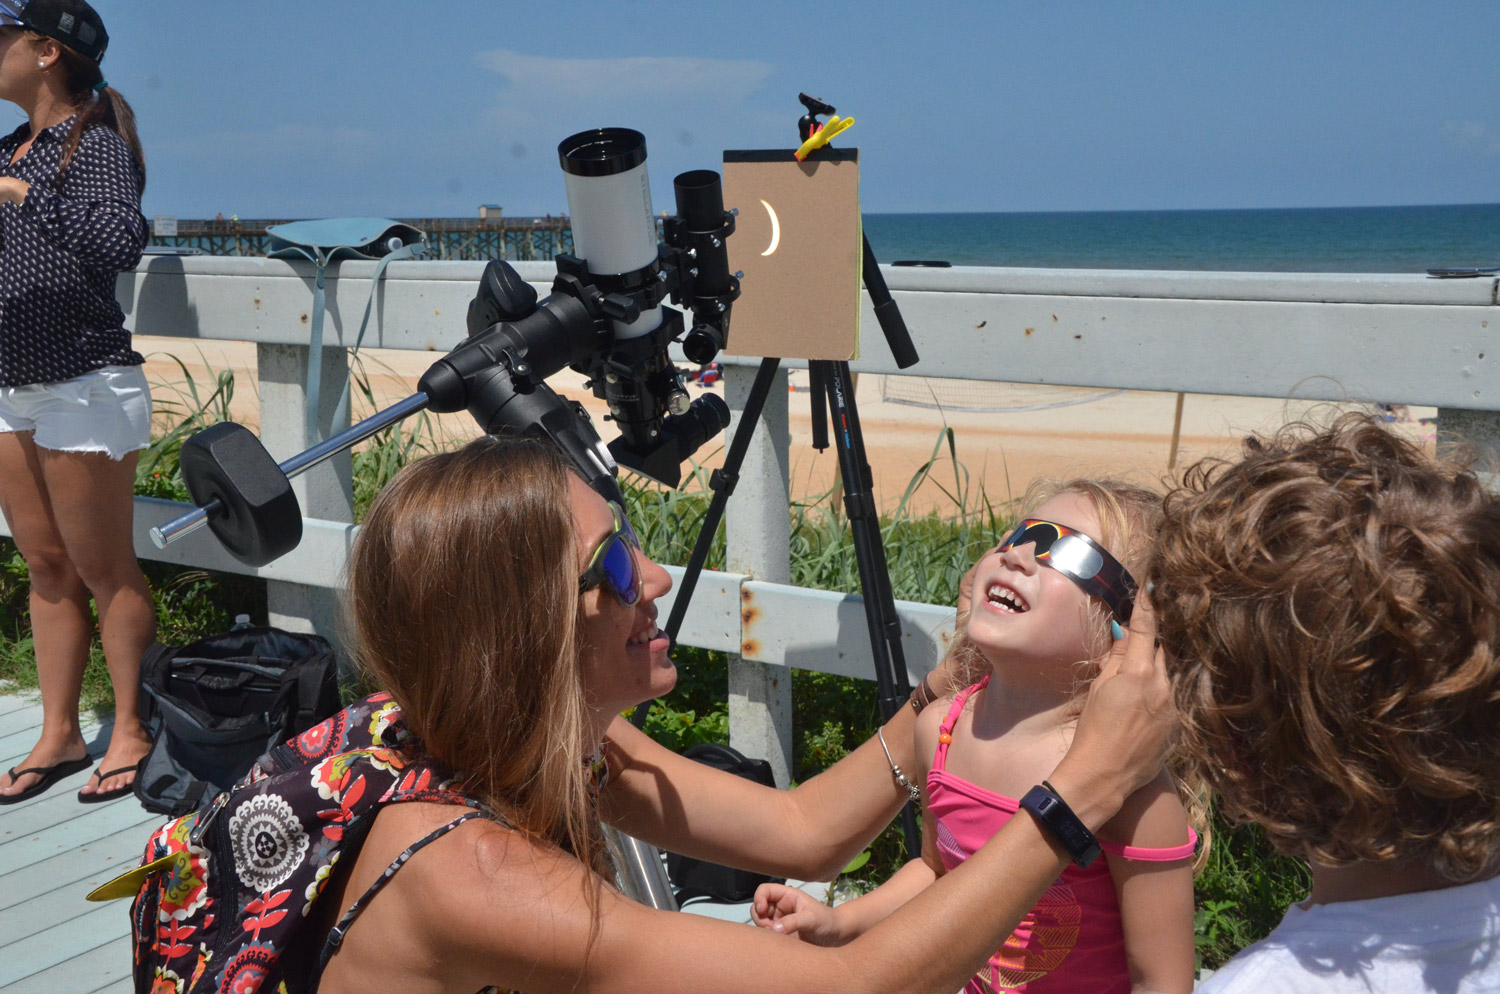 Kailani Raby, 3, of Flagler Beach, with her mother Tiffany Wiggen, catching the eclipse at its peak as it is also refracted by the telescope Scott Spradley had set up on the Flagler Beach Boardwalk this afternoon. Click on the image for larger view. (© FlaglerLive)